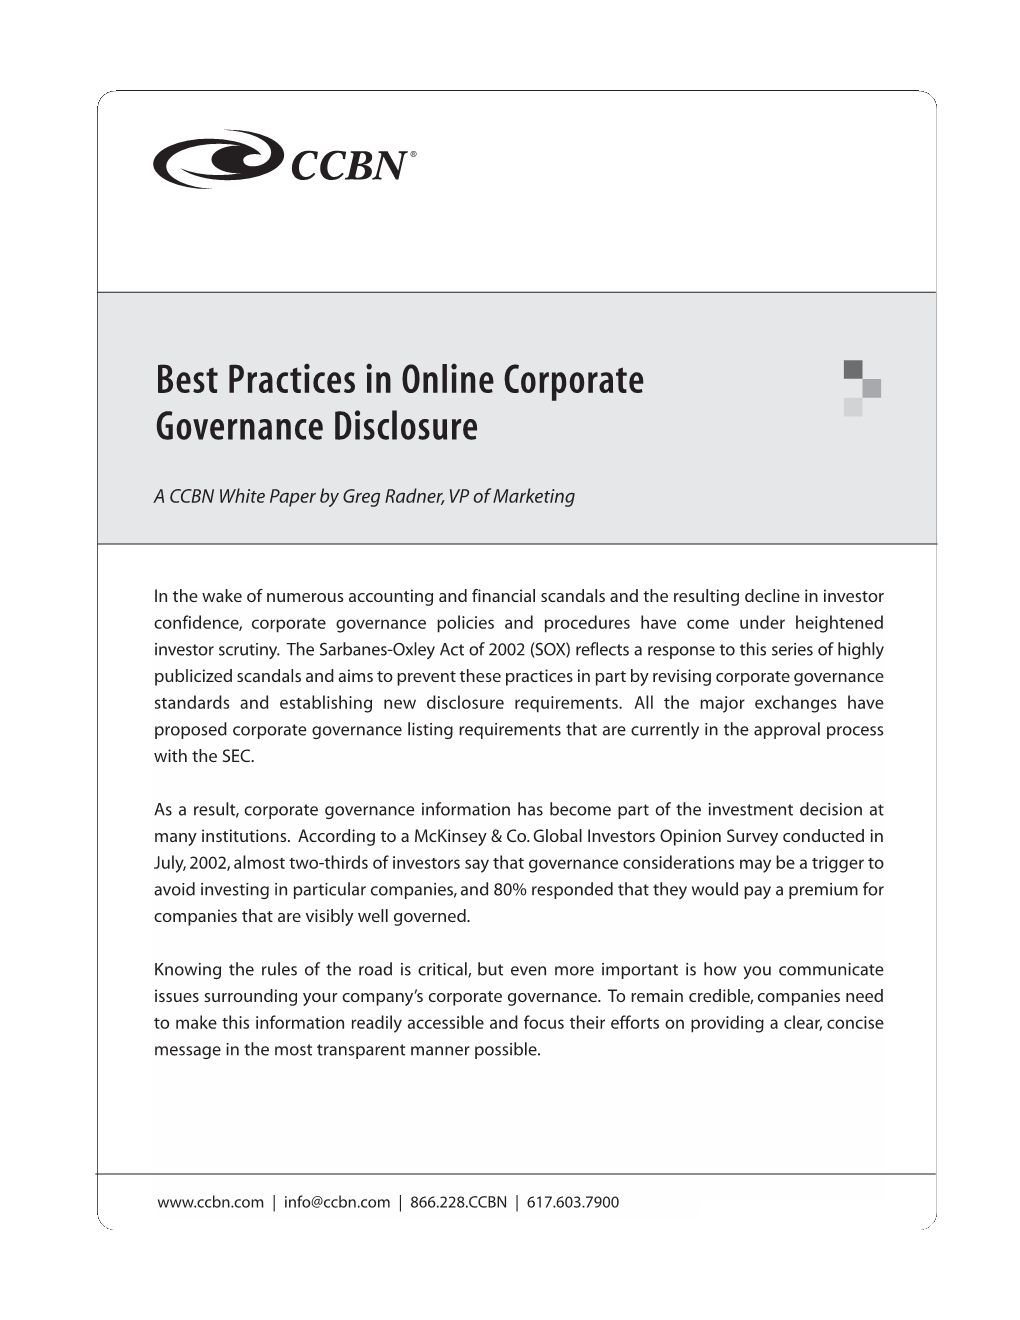 Best Practices in Online Corporate Governance Disclosure